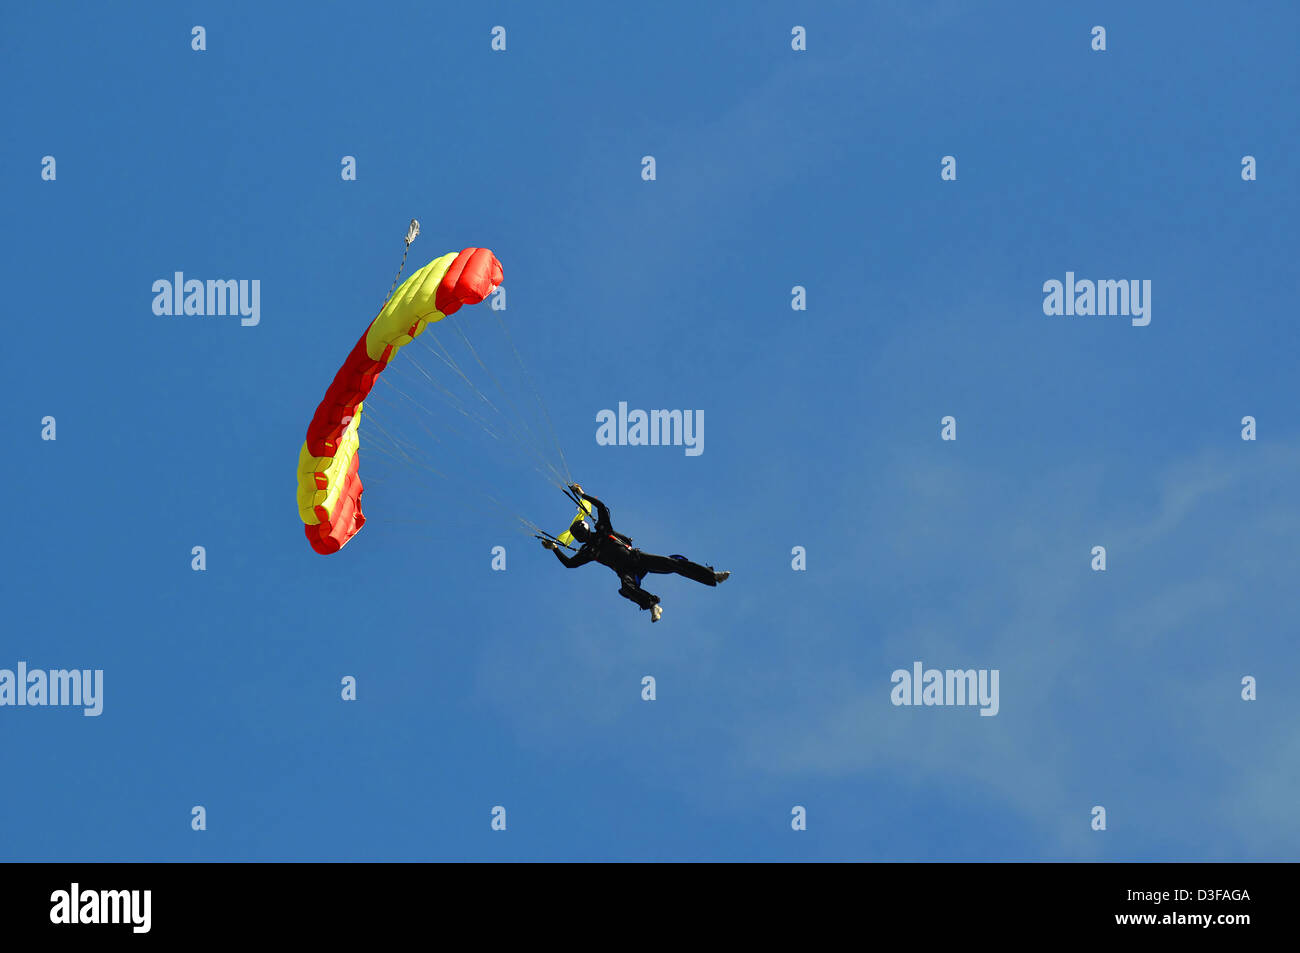 Acrobatic skydiving with colored parachute on blue sky. Stock Photo